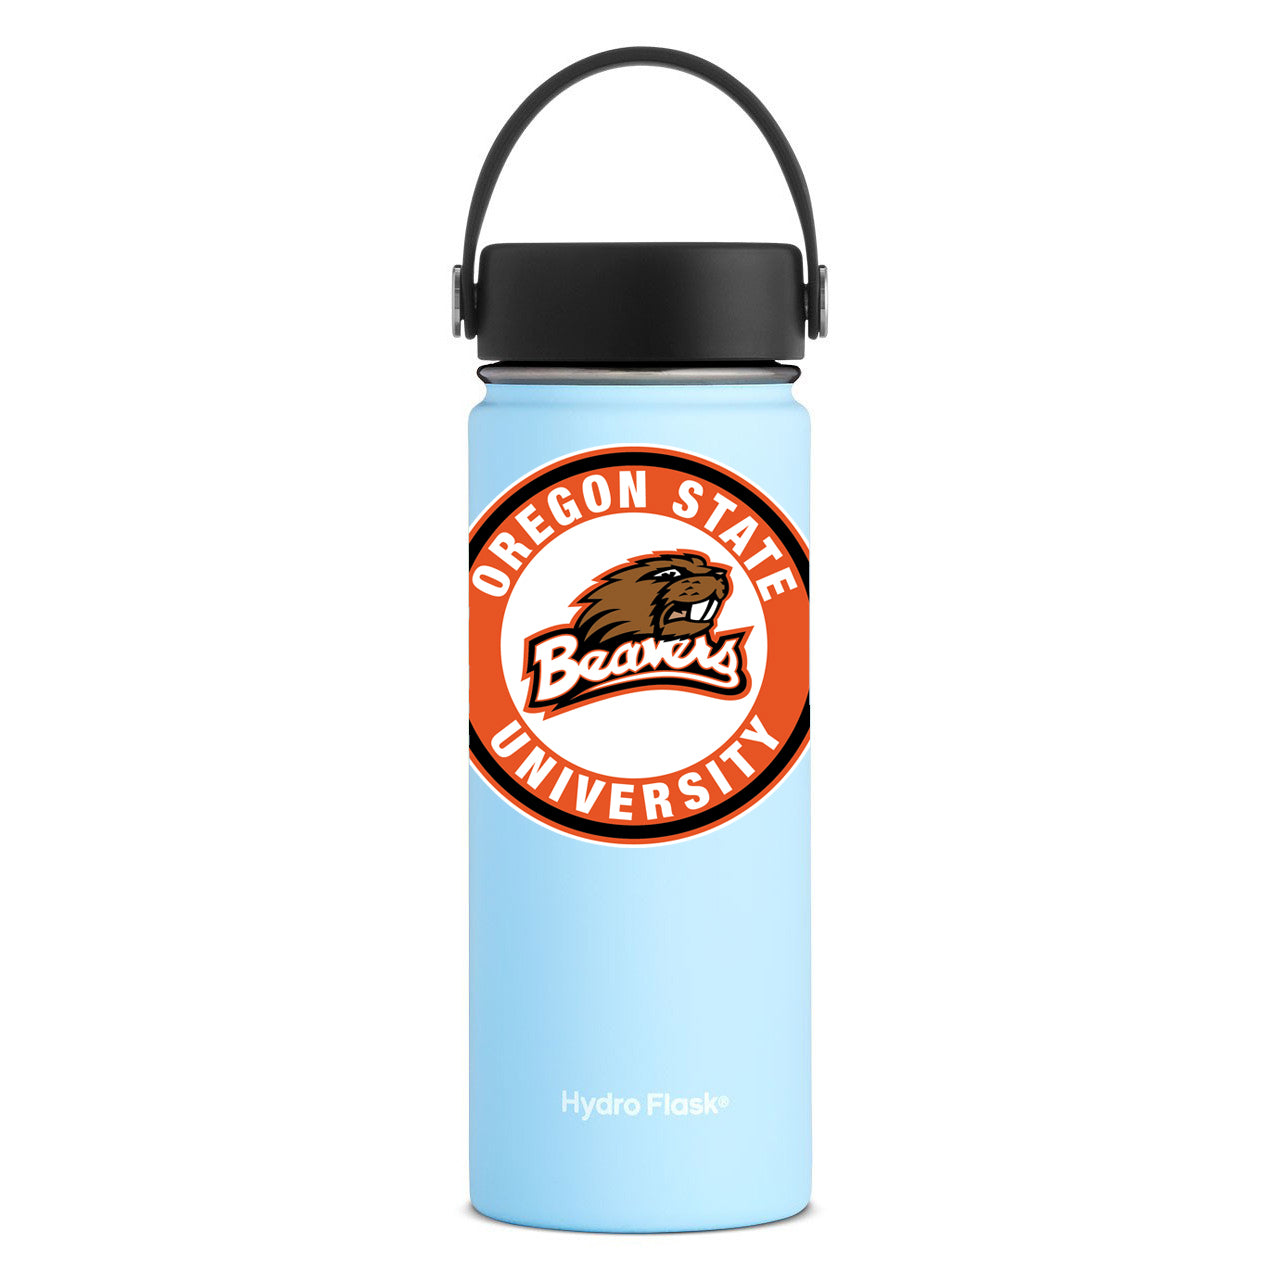 Oregon State Beavers 16oz. Stainless Steel Water Bottle